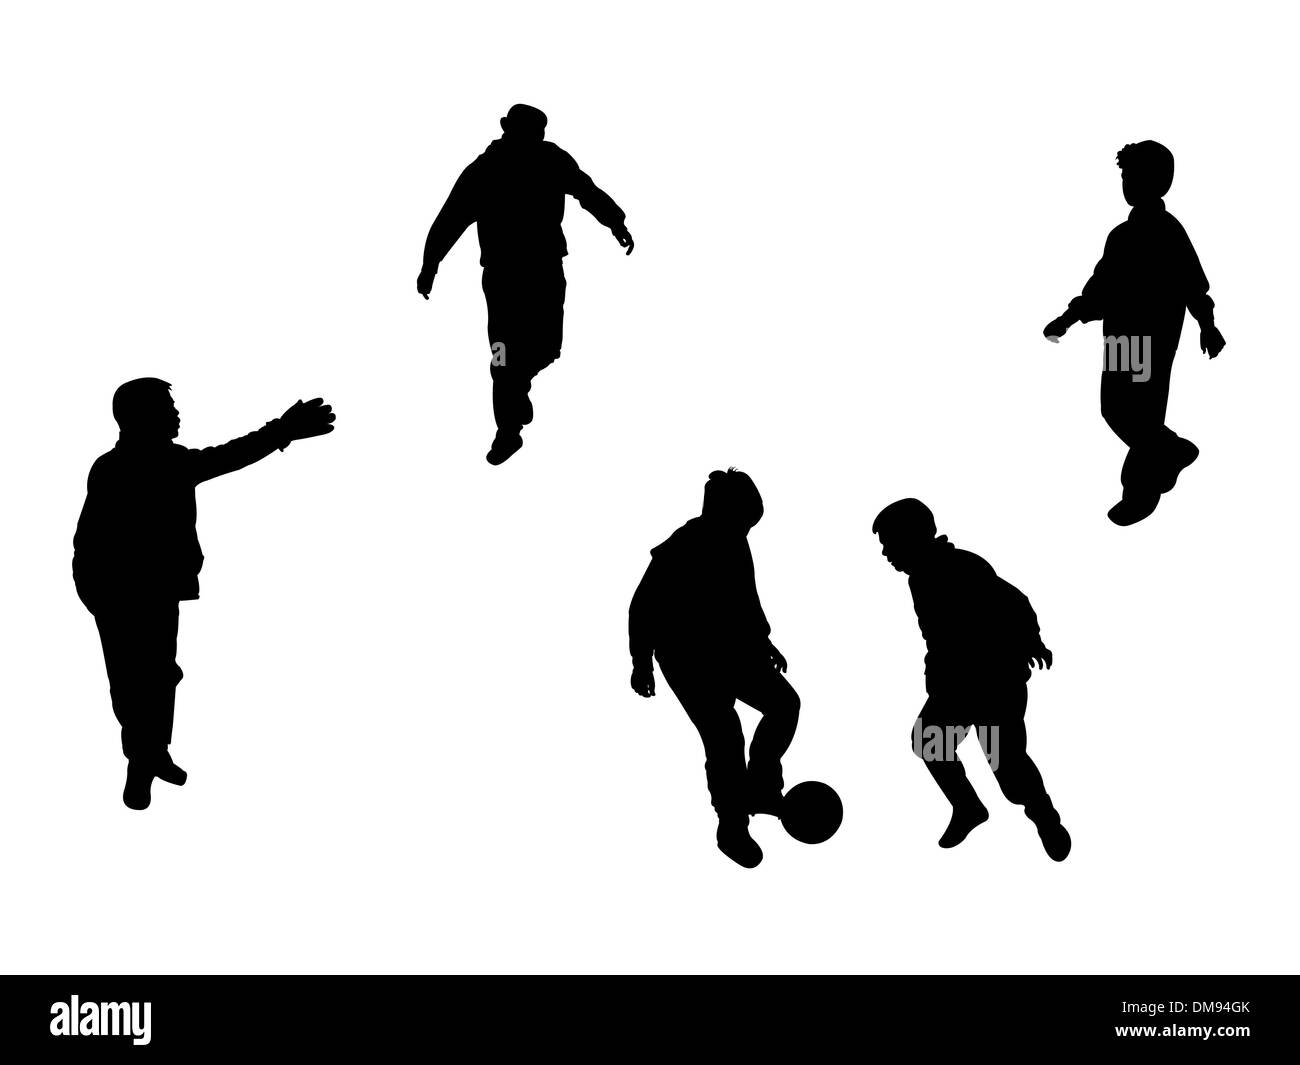 football players silhouettes Stock Vector